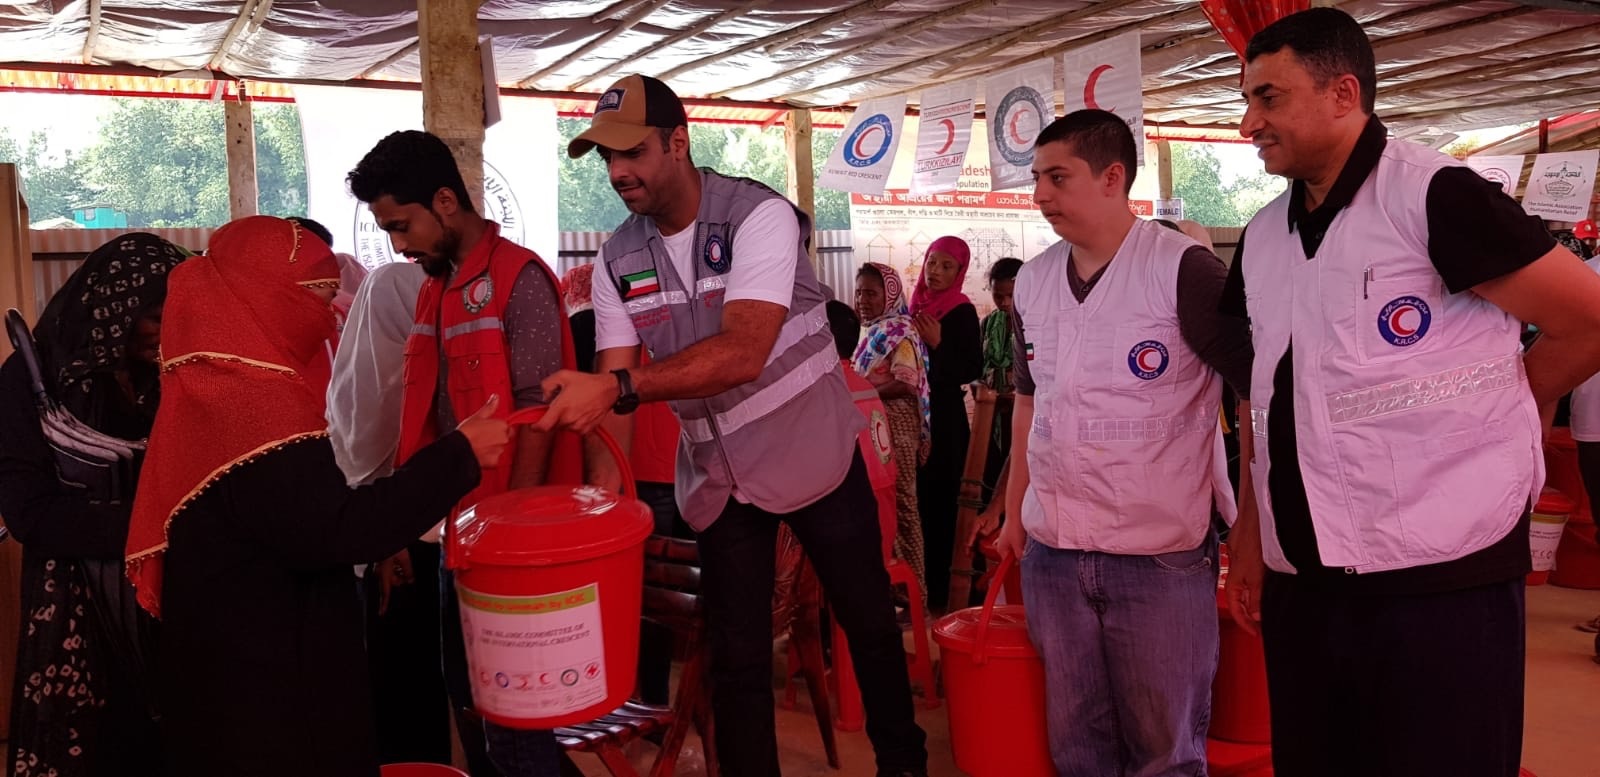 Kuwait Red Crescent Society (KRCS) distributes Rohingya refugees in Bangladesh to alleviate their suffering